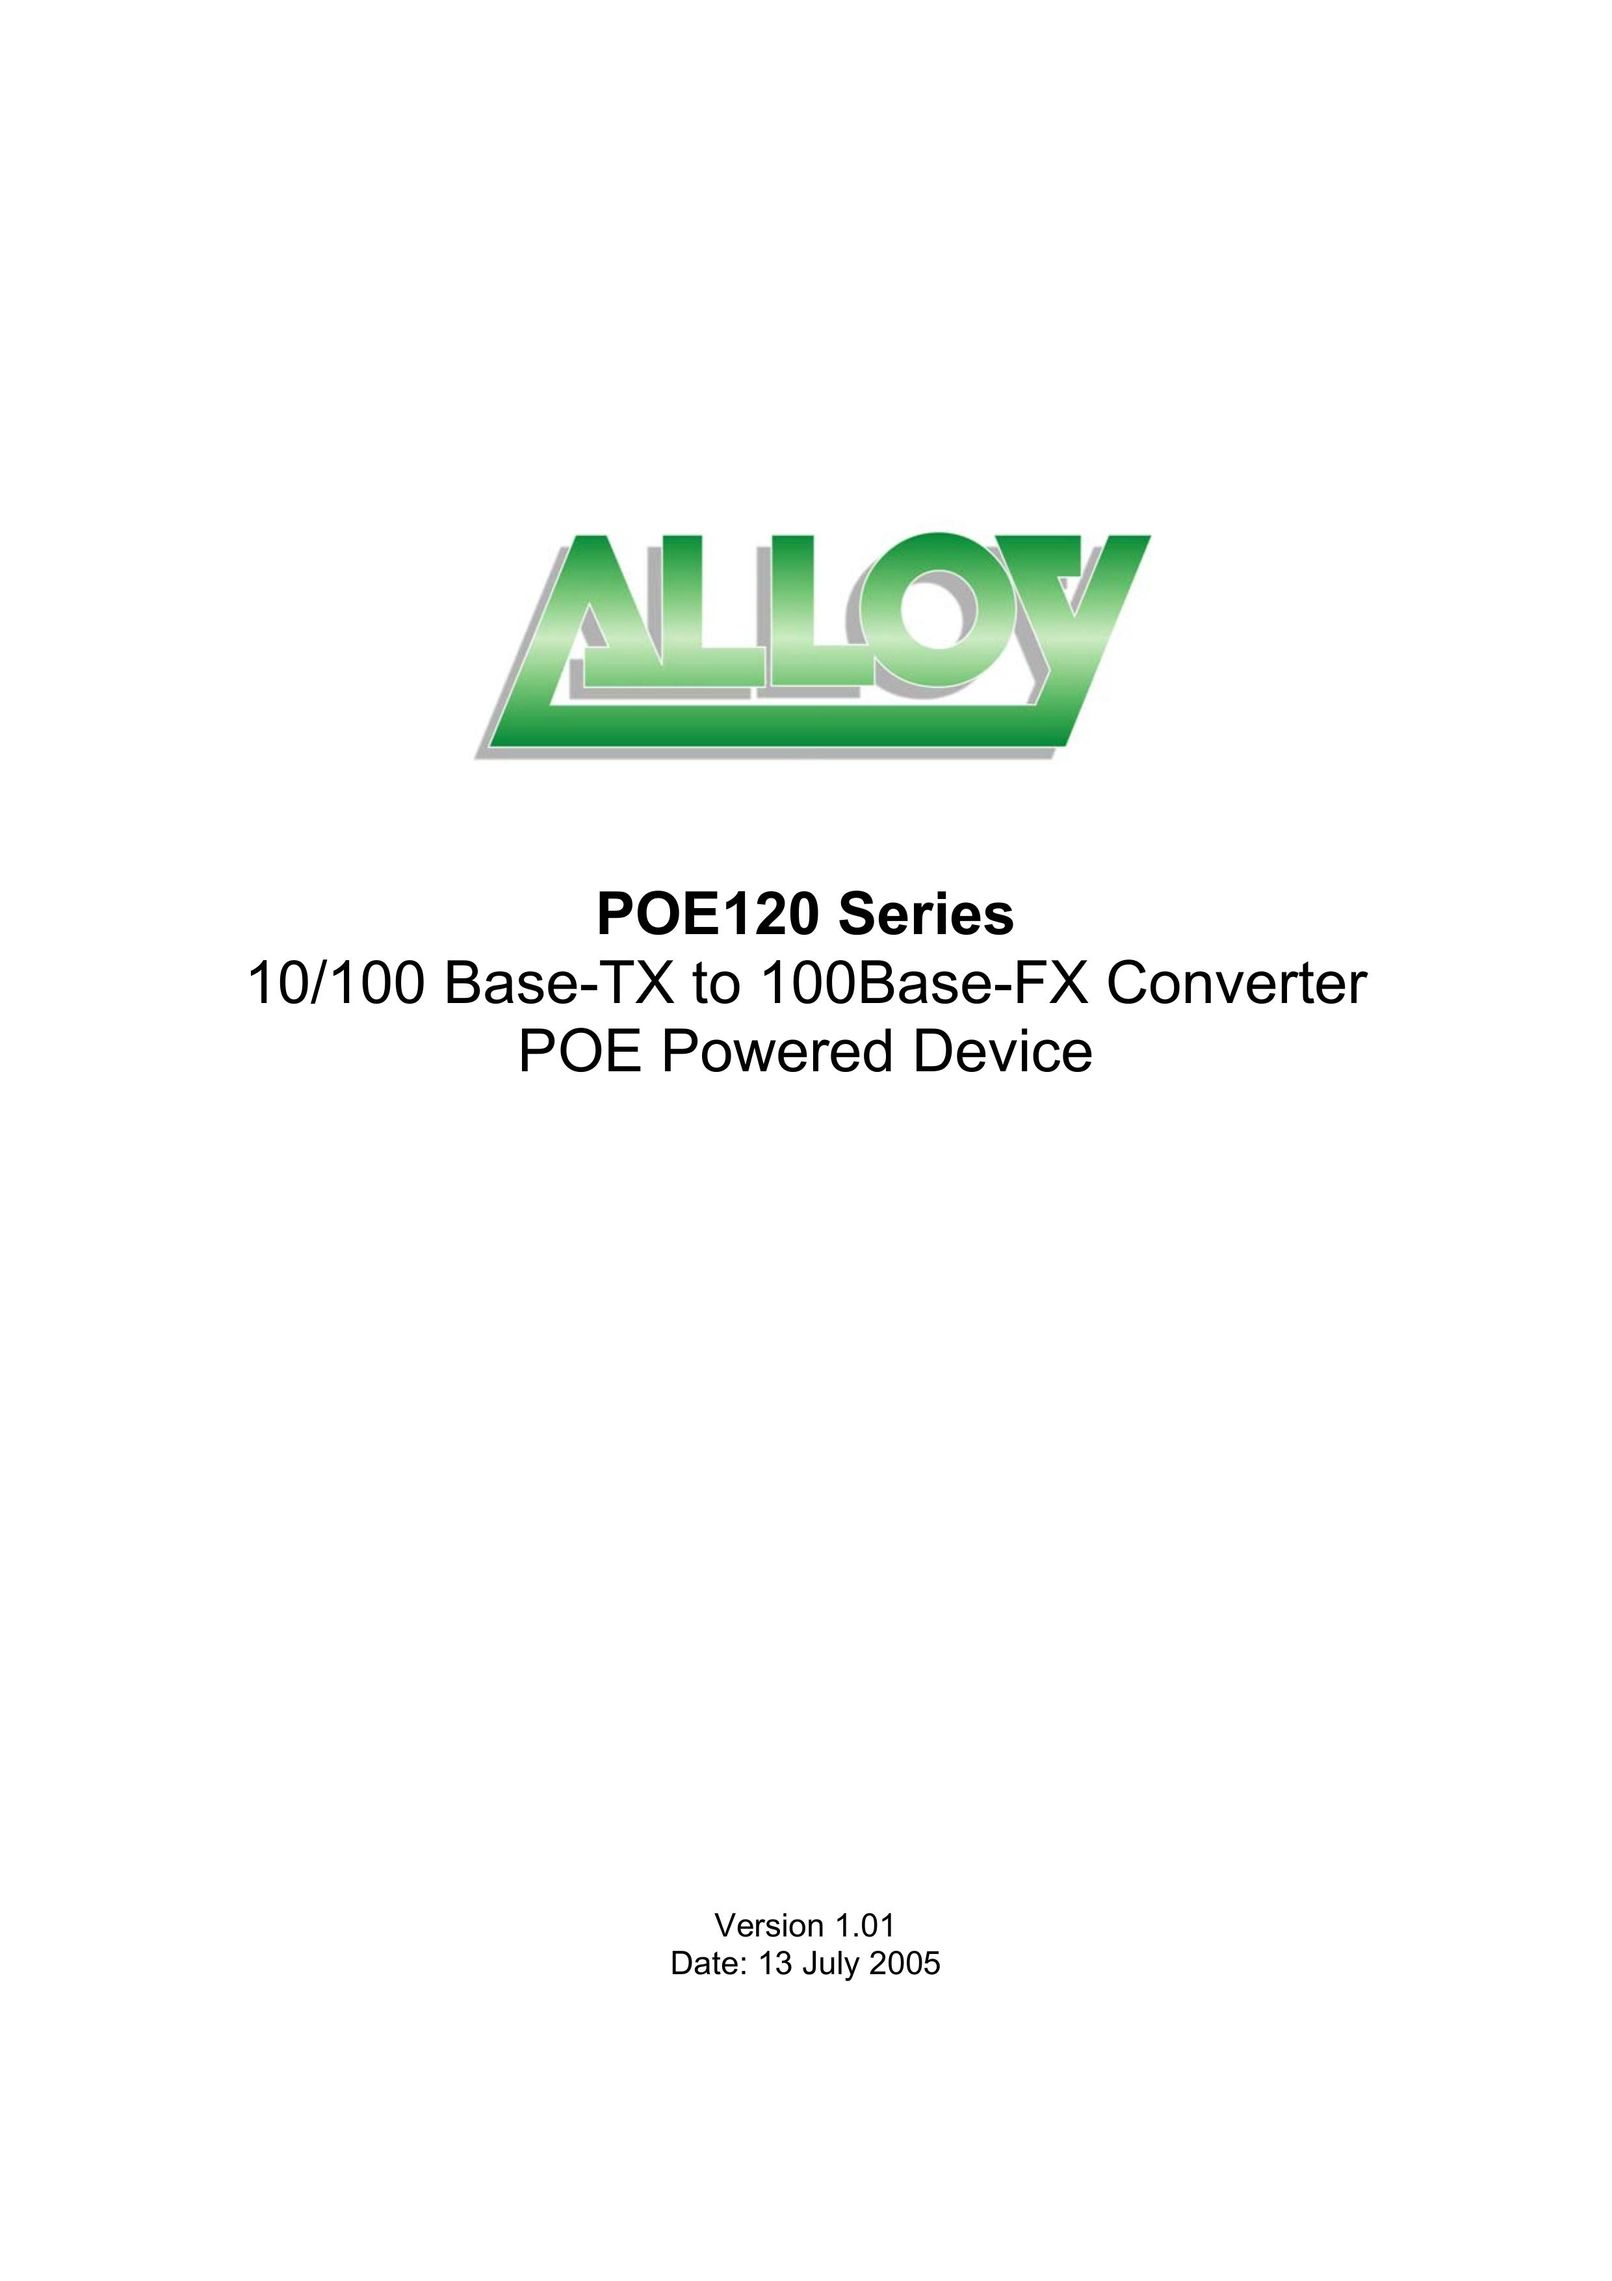 Alloy Computer Products POE120 Series TV Converter Box User Manual